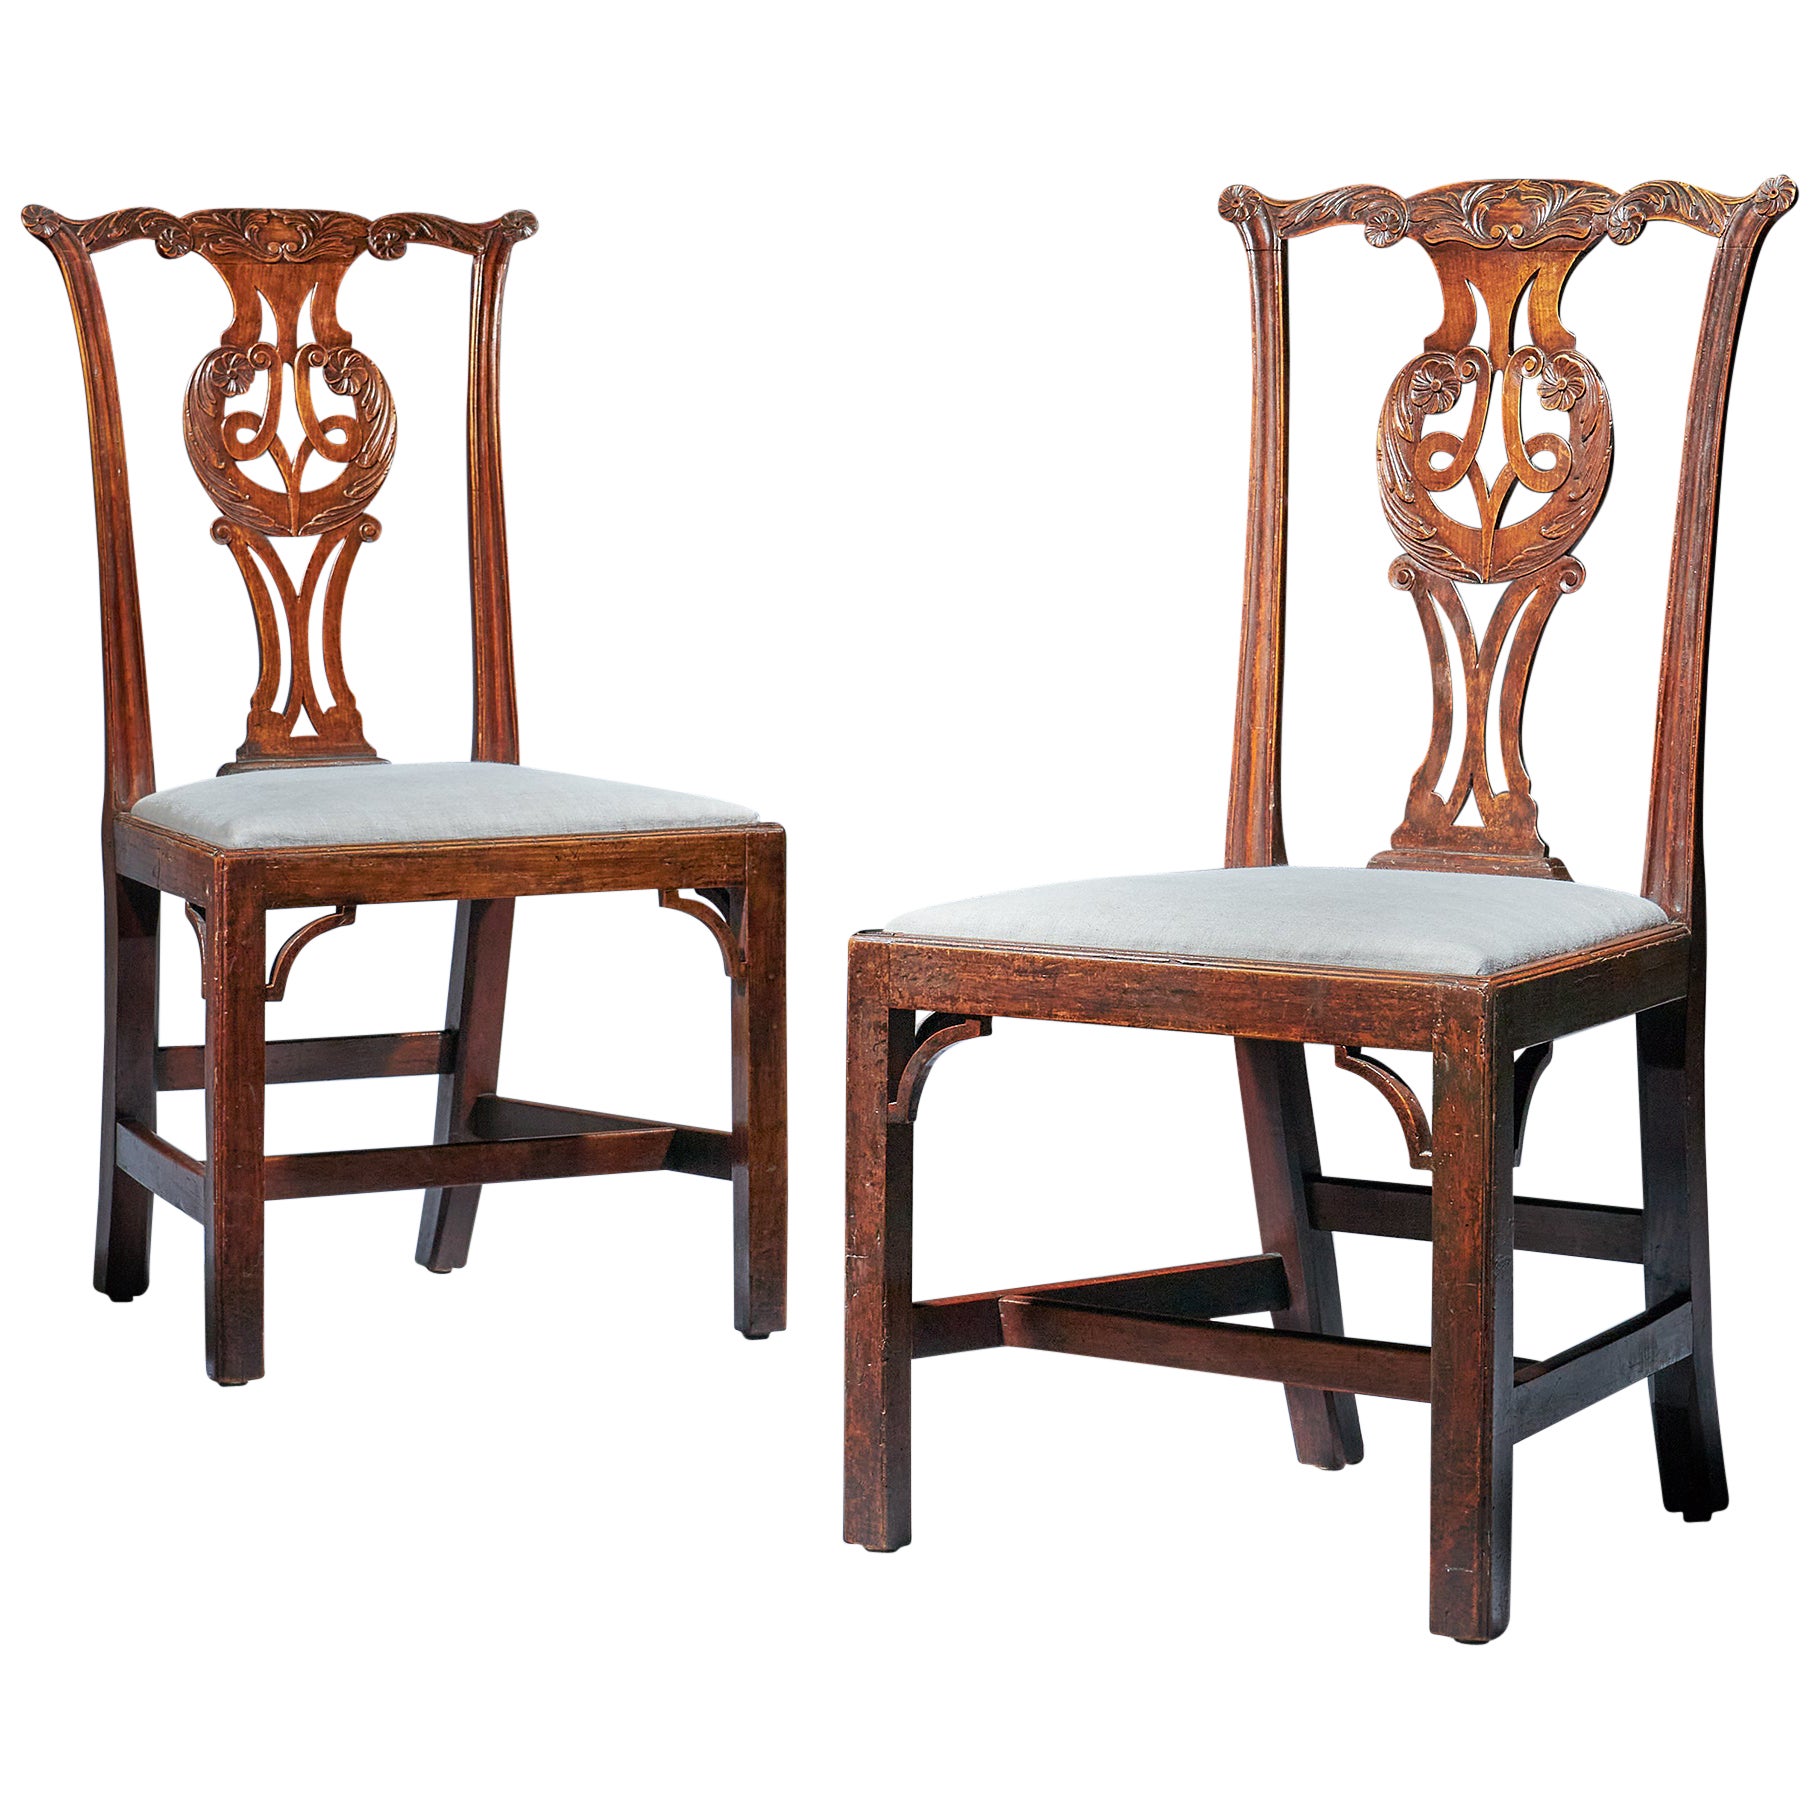 Unusual Pair of 18th Century George III Cherry Chairs, Chippendale Period For Sale